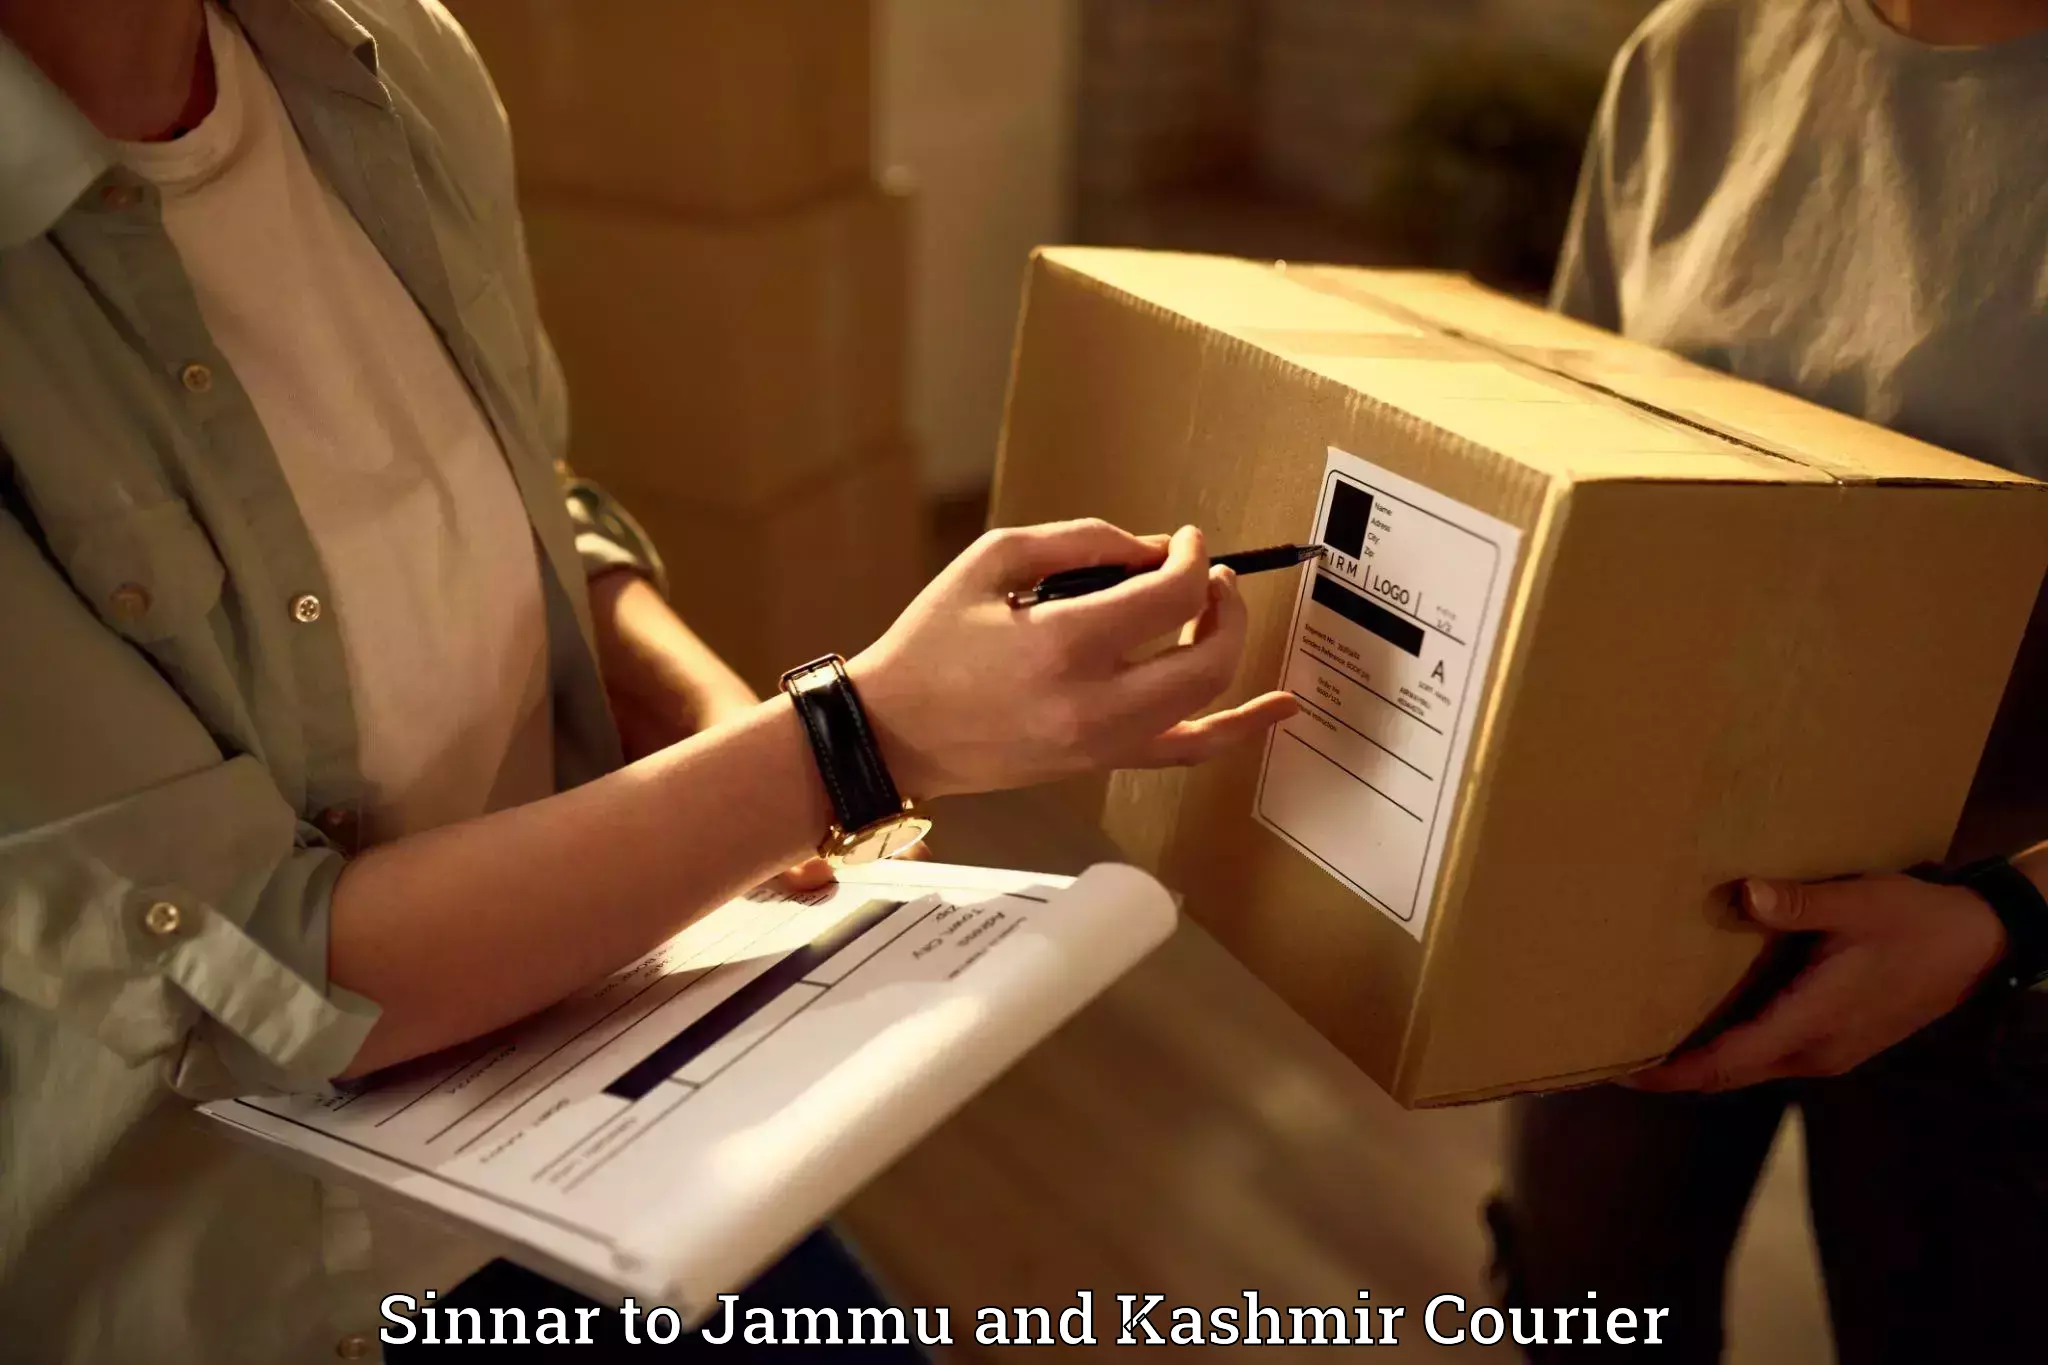 Furniture delivery service Sinnar to Jammu and Kashmir